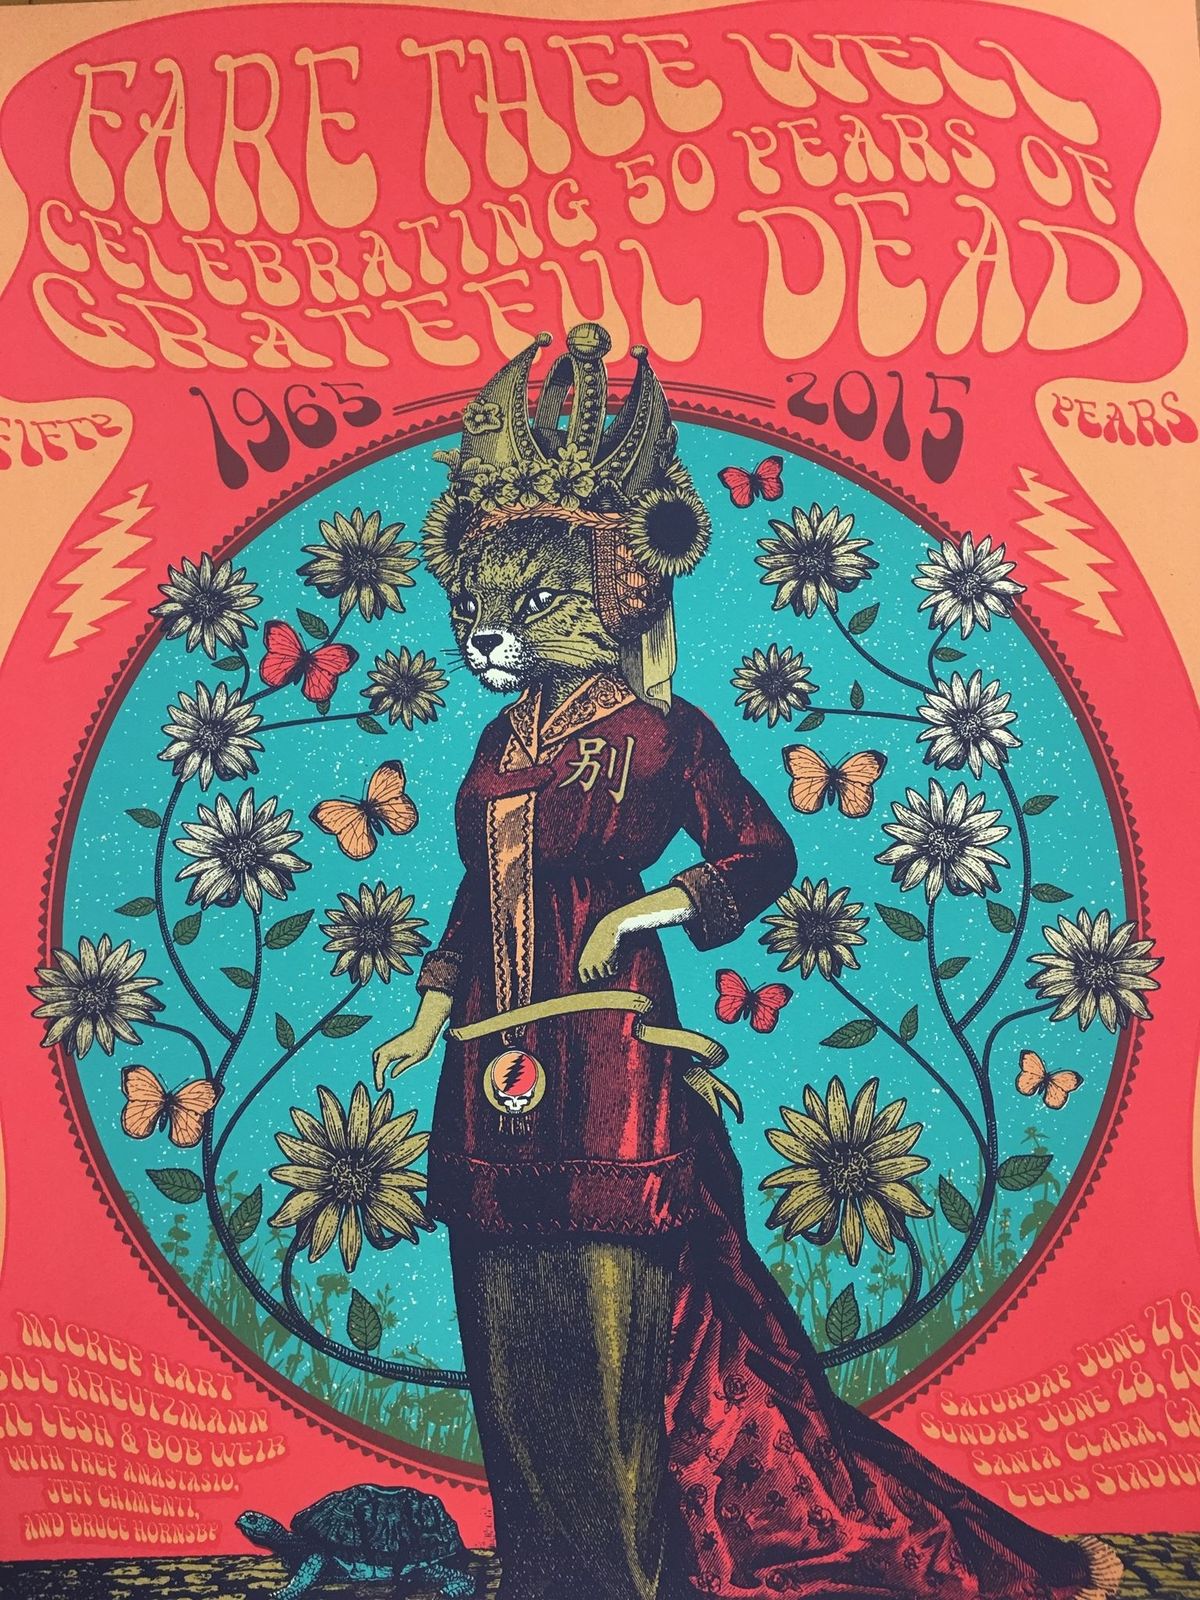 Title:  Grateful Dead China Cat  Artist:  Justin Helton  Edition:  Limited release of only 2015 total made, signed and numbered by the artist--this poster is getting rarer by the day. 2015 Poster Print Fare Thee Well  This poster was created to commemorate the 50th anniversary Fare Thee Well shows  Type:  Screen printed poster  Size:  24" x 18"  Venue: Levi's Stadium  Location:  Santa Clara, CA  Notes:  Check out our other listings for more hard-to-find and out-of-print posters